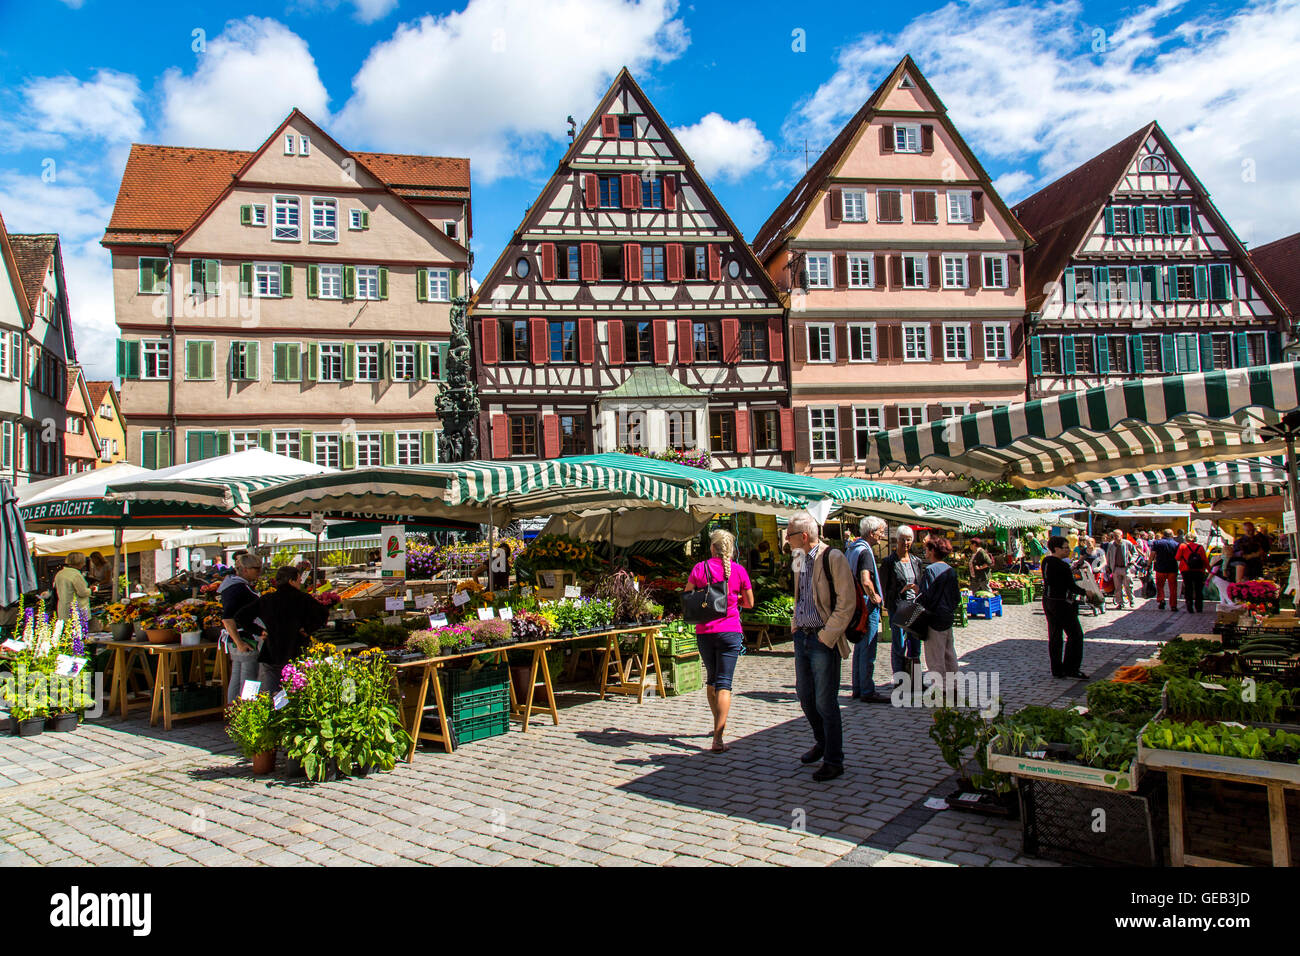 Fresh weekly farmers market on the historic market place, in the old town of Tübingen, Germany Stock Photo